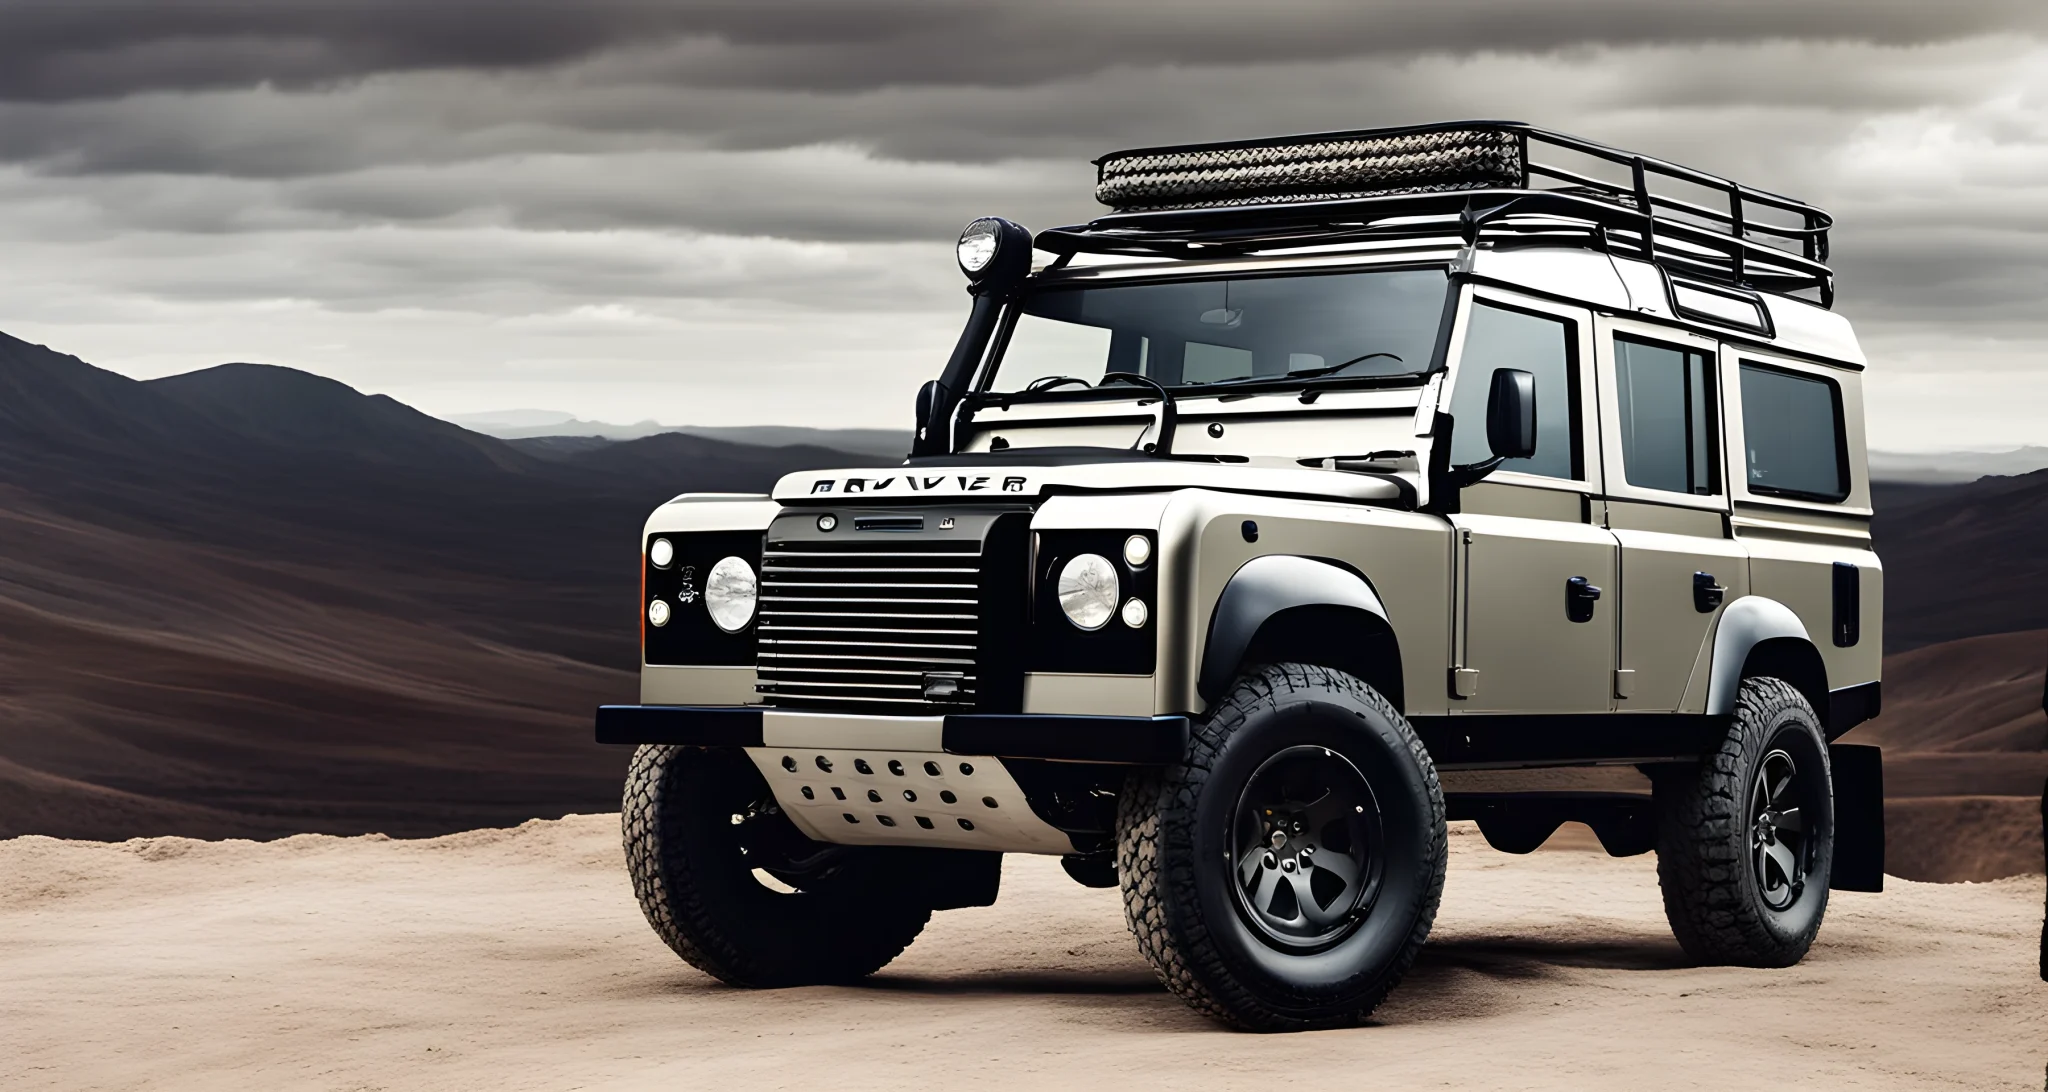 The image shows a sleek, luxury Land Rover vehicle with a powerful engine and off-road capabilities.